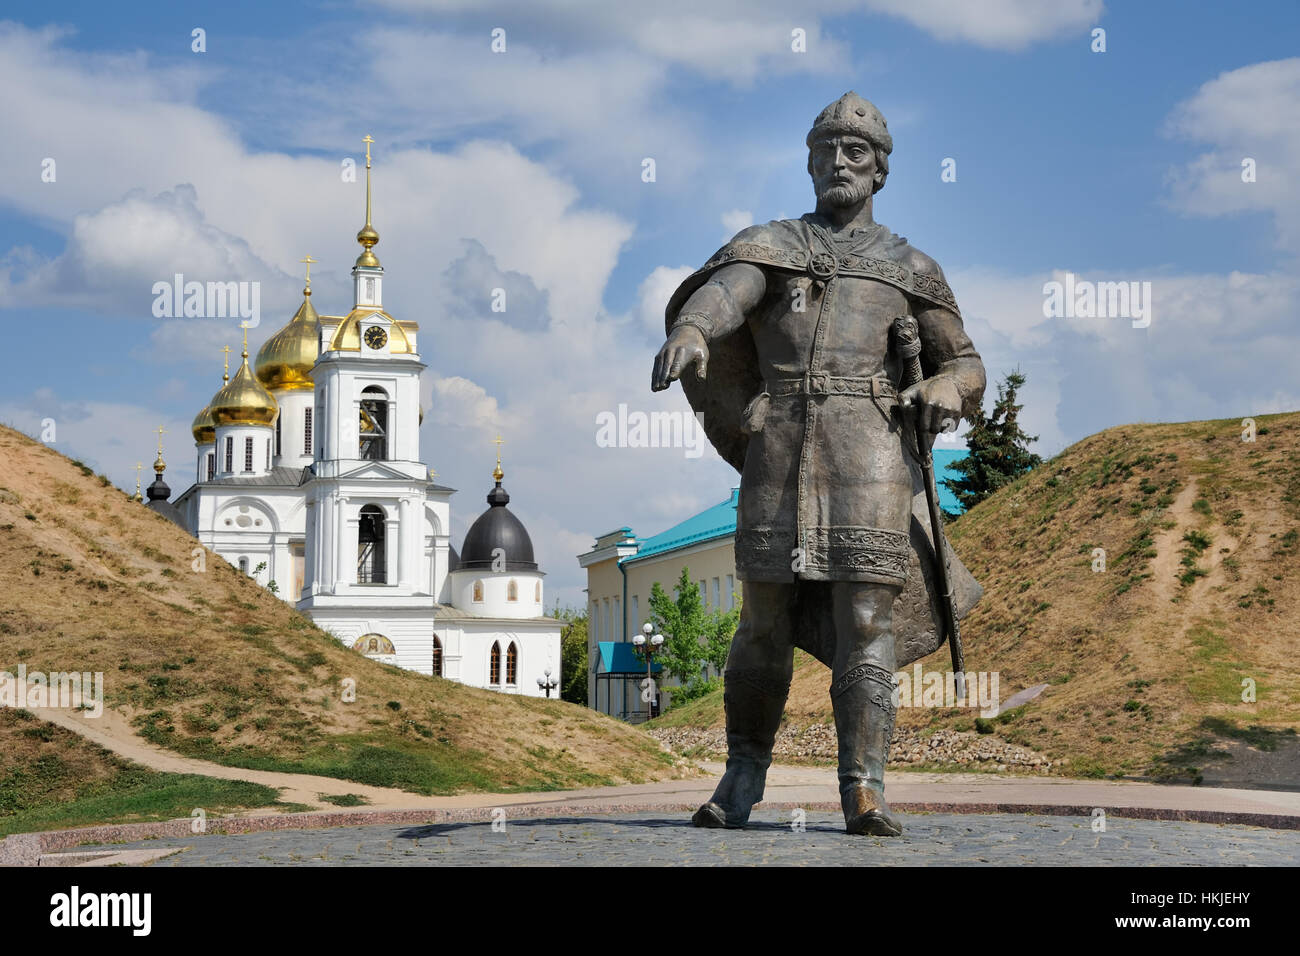 = Dmitrov’s Monument to Grand Prince Yuri Dolgoruky =  The monument to Grand Prince Yuri Dolgoruky, the founder of many cities in Russia including Mos Stock Photo